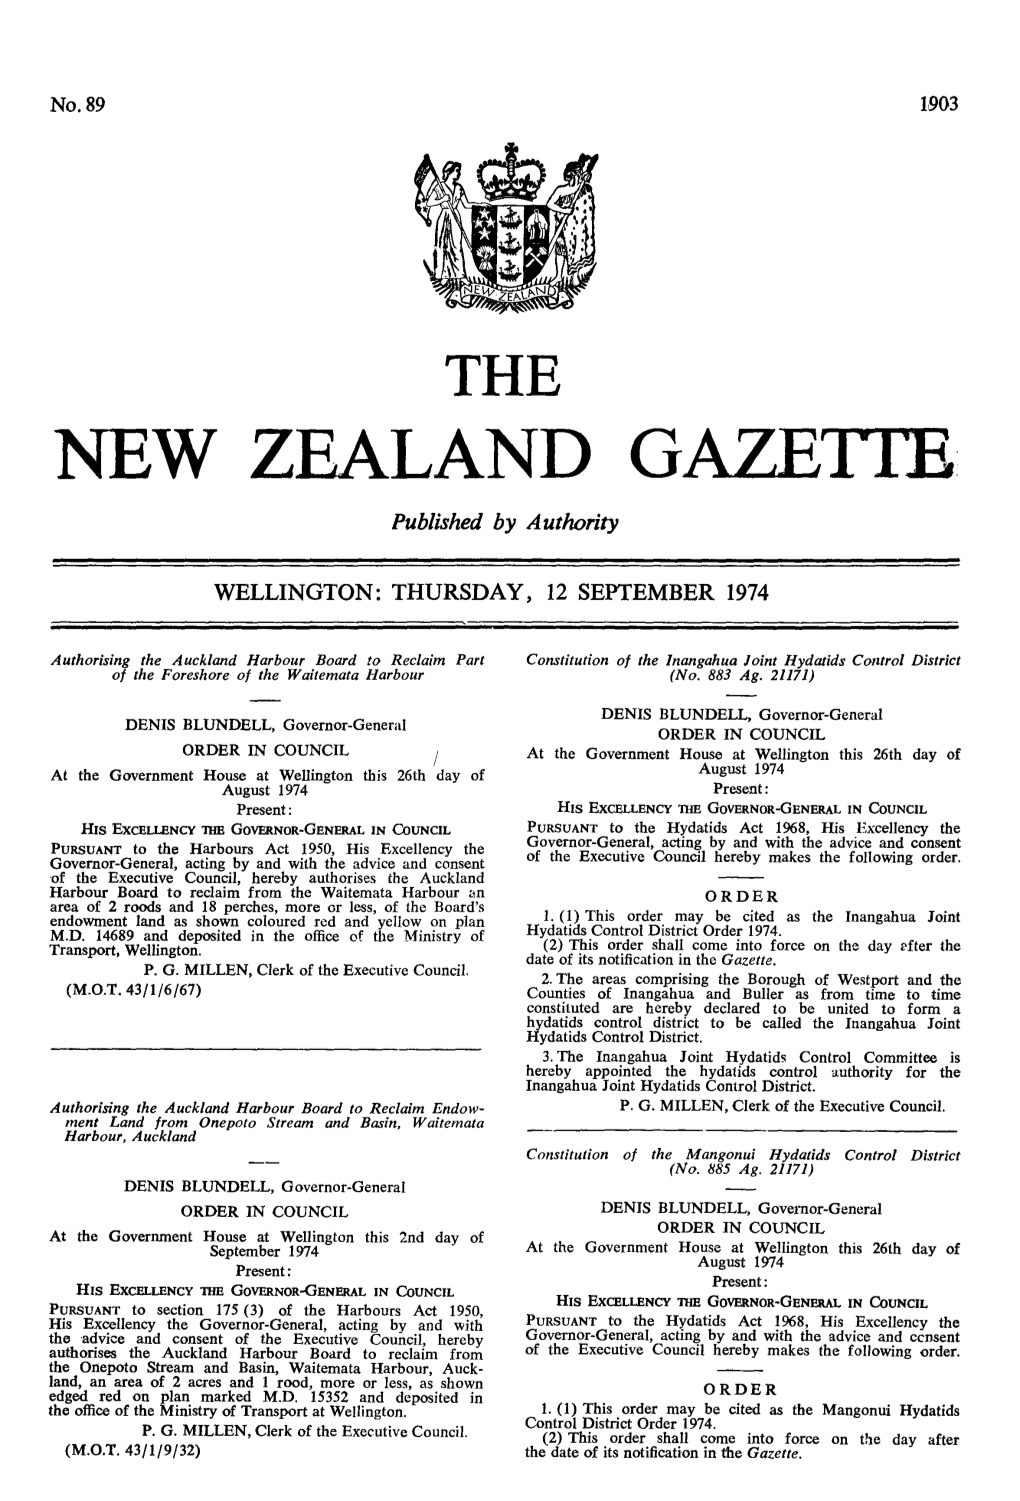 NEW ZEALAND GAZR'l*IE Published by Authority